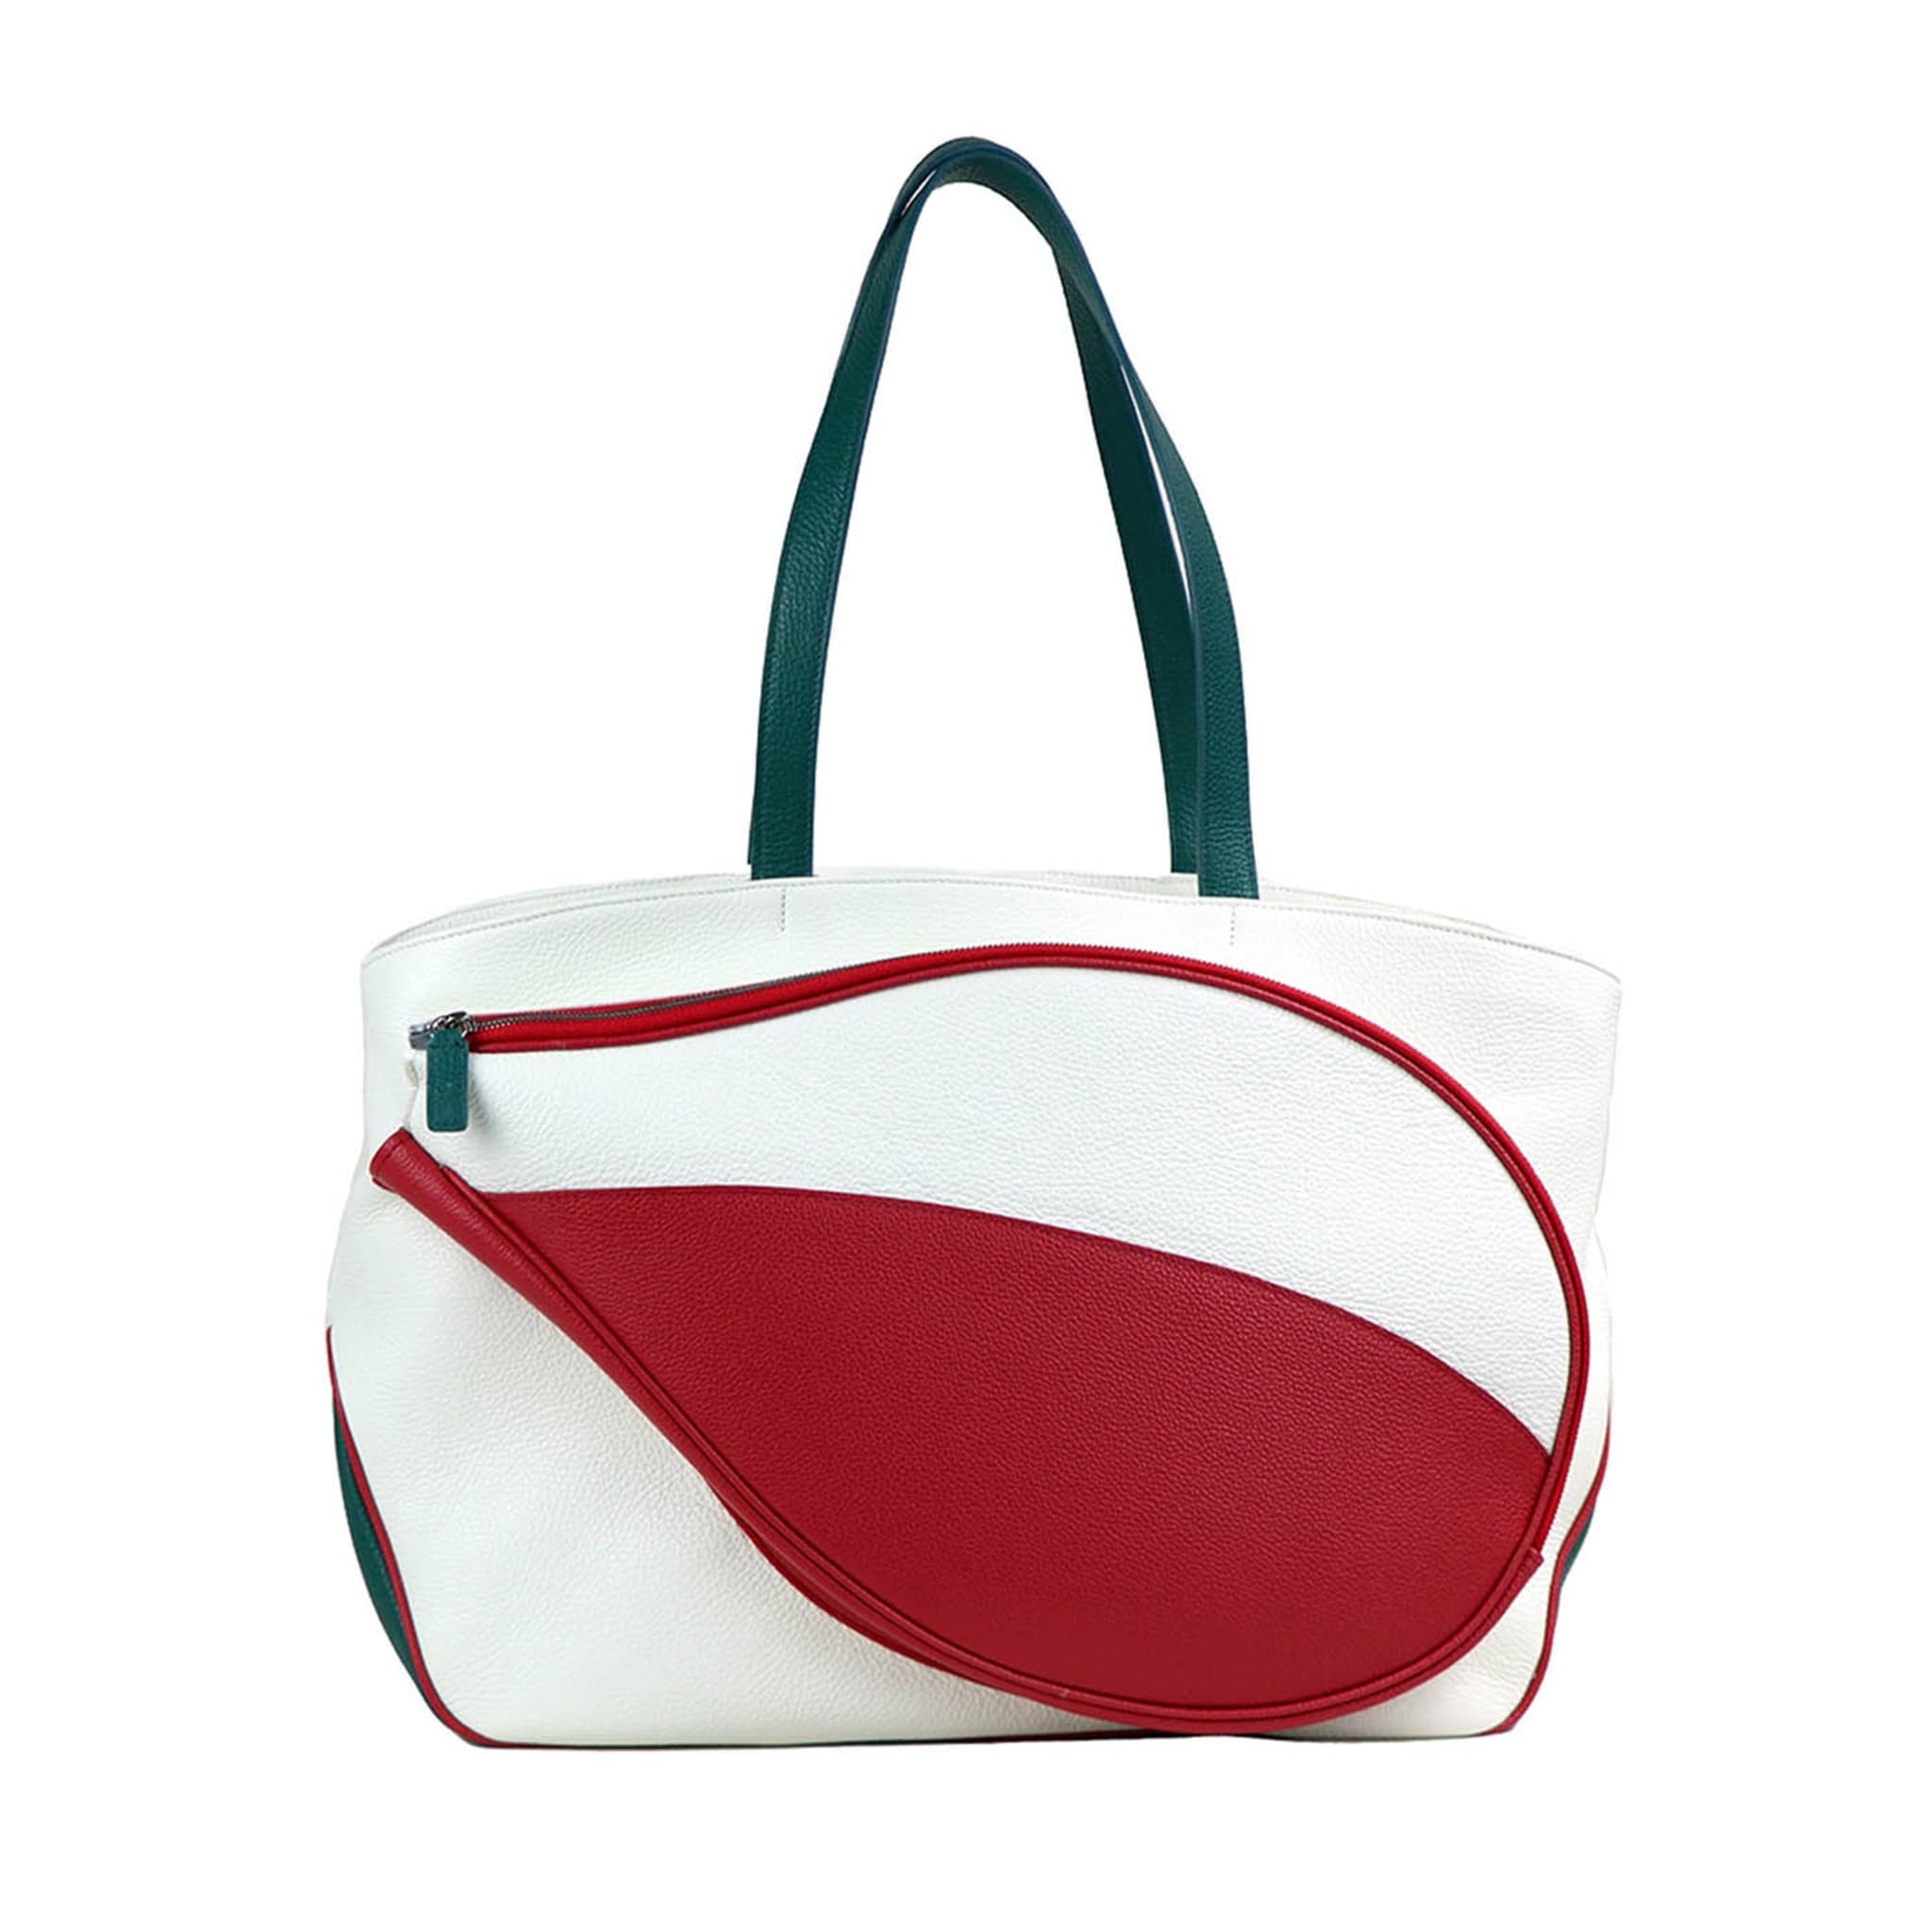 Sport White & Red Bag with Tennis-Racket-Shaped Pocket - Main view